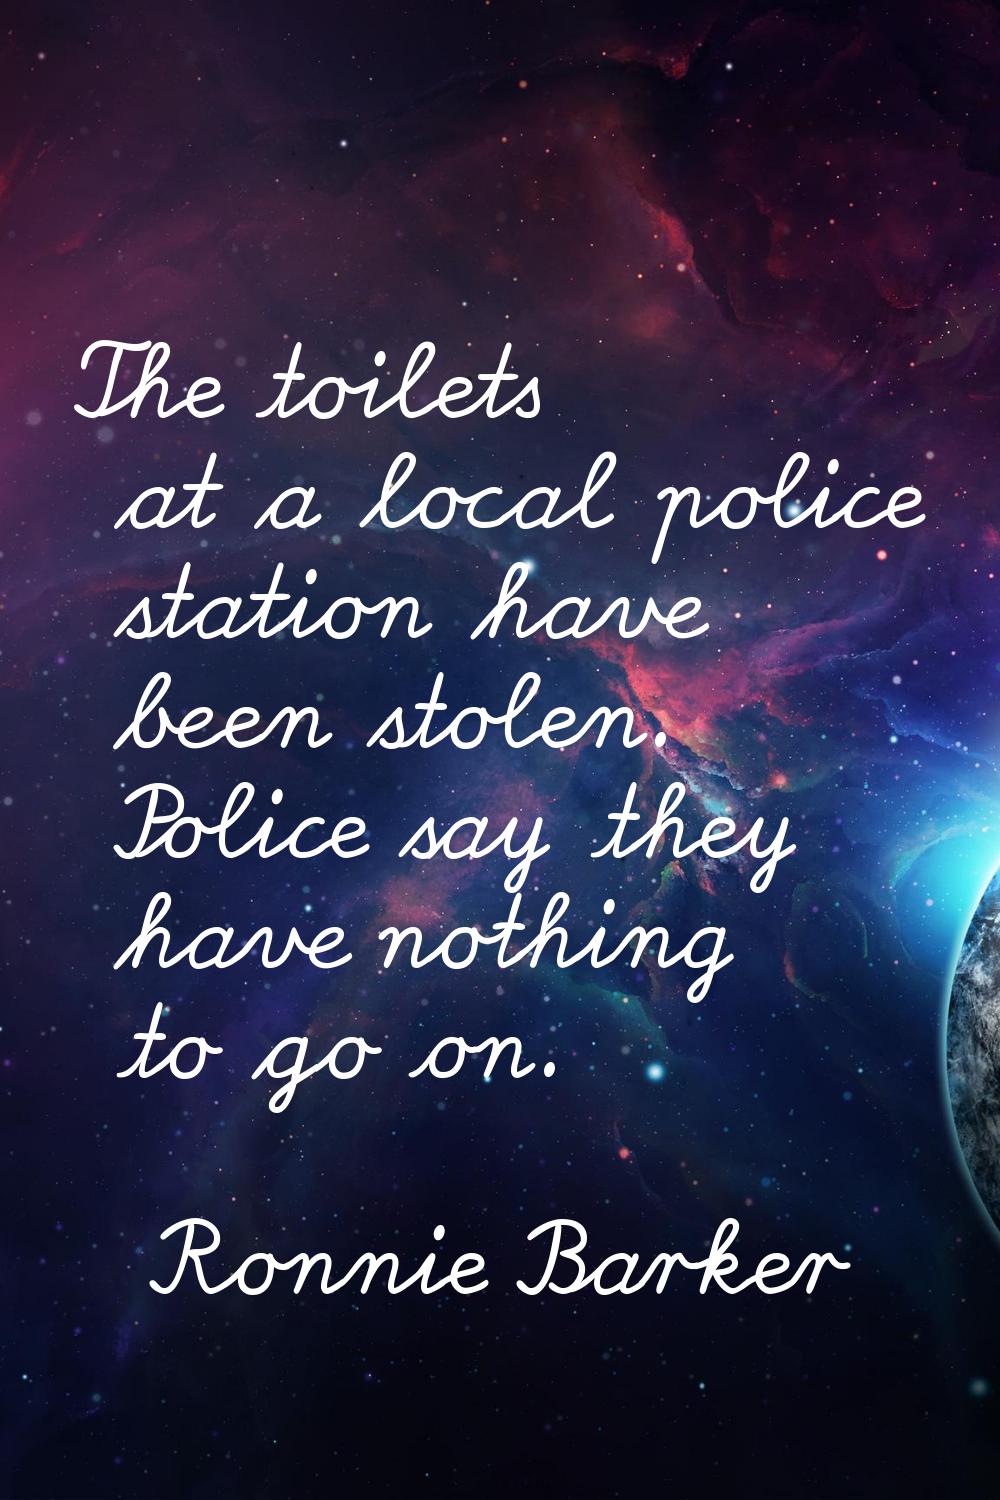 The toilets at a local police station have been stolen. Police say they have nothing to go on.